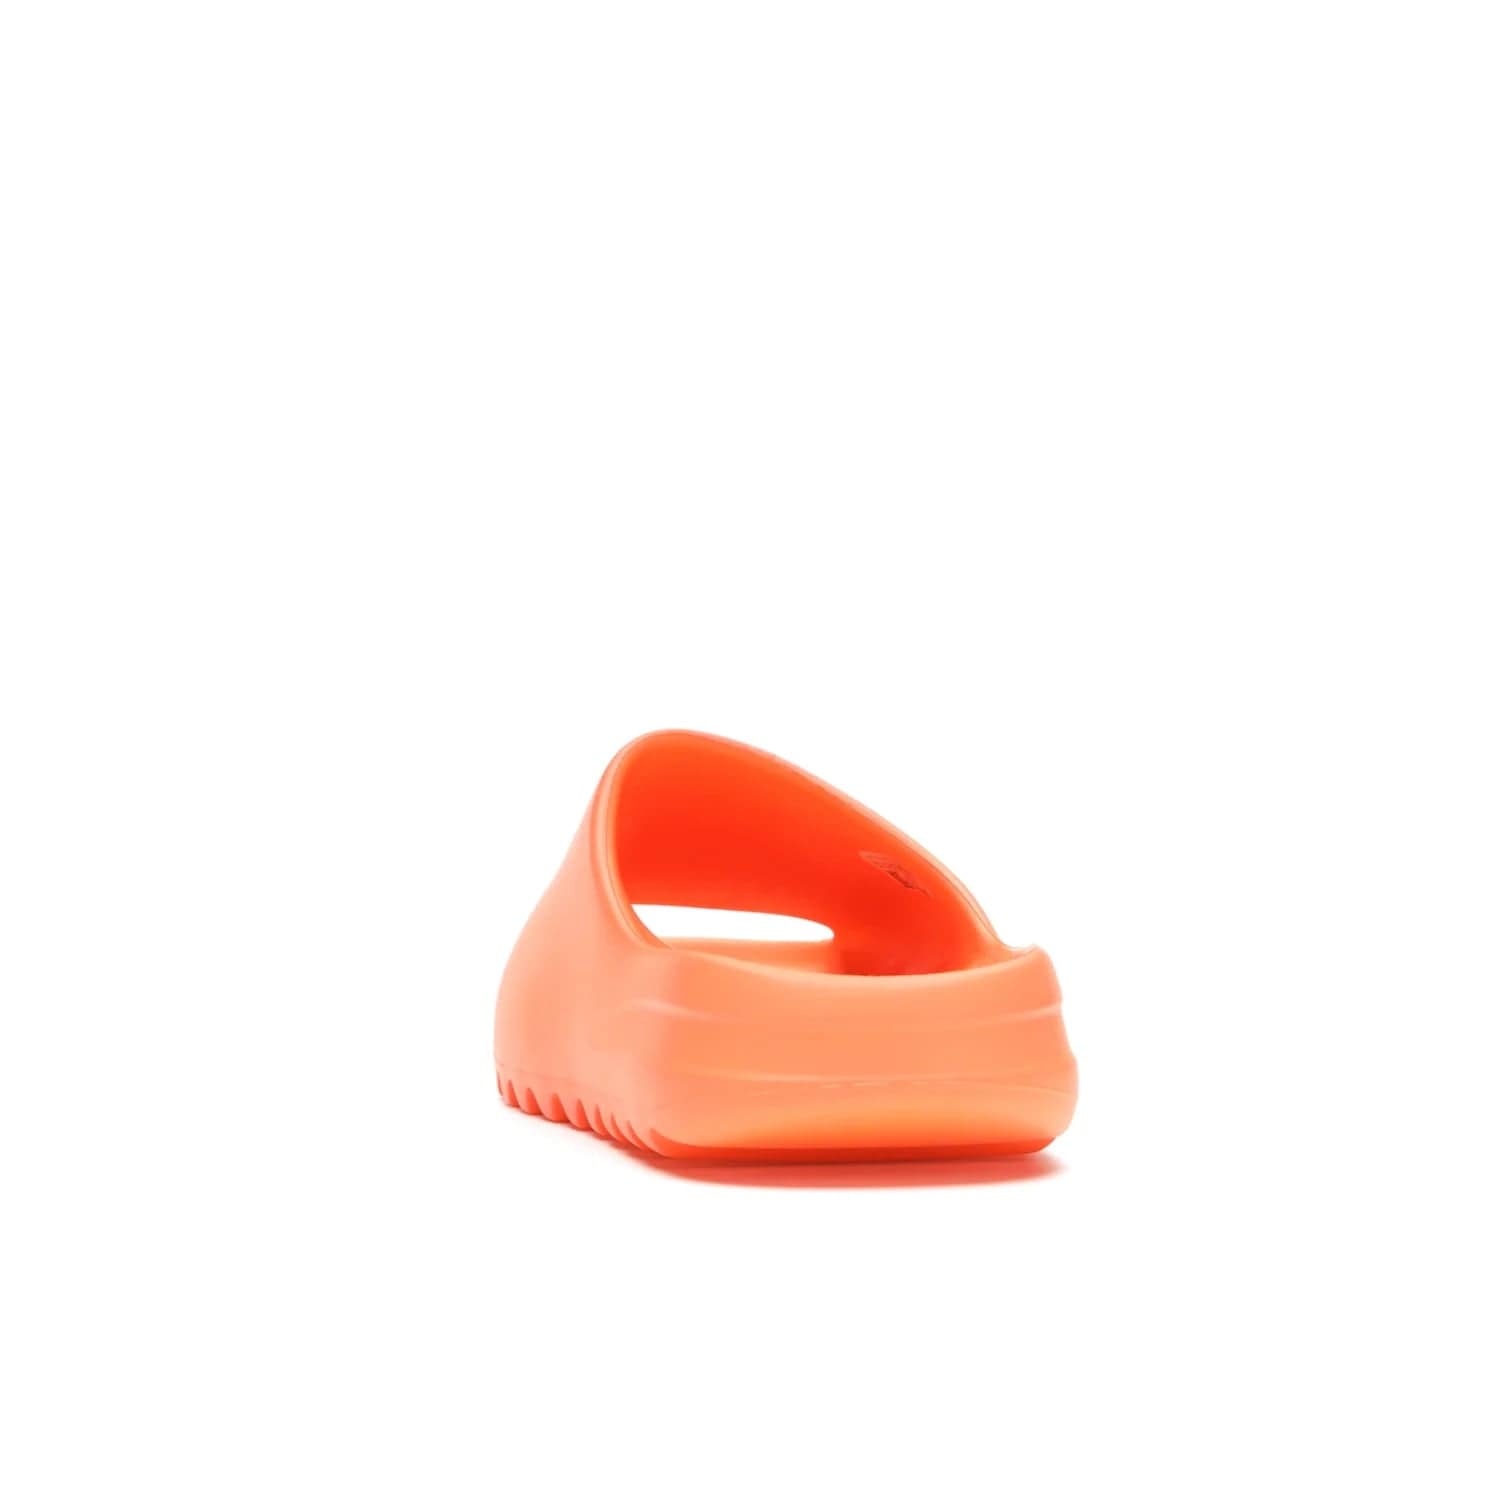 adidas Yeezy Slide Enflame Orange - Image 27 - Only at www.BallersClubKickz.com - Limited edition adidas Yeezy Slide featuring a bold Enflame Orange upper and EVA foam construction. Grooved outsole for traction and support. Released June 2021. Perfect for summer.